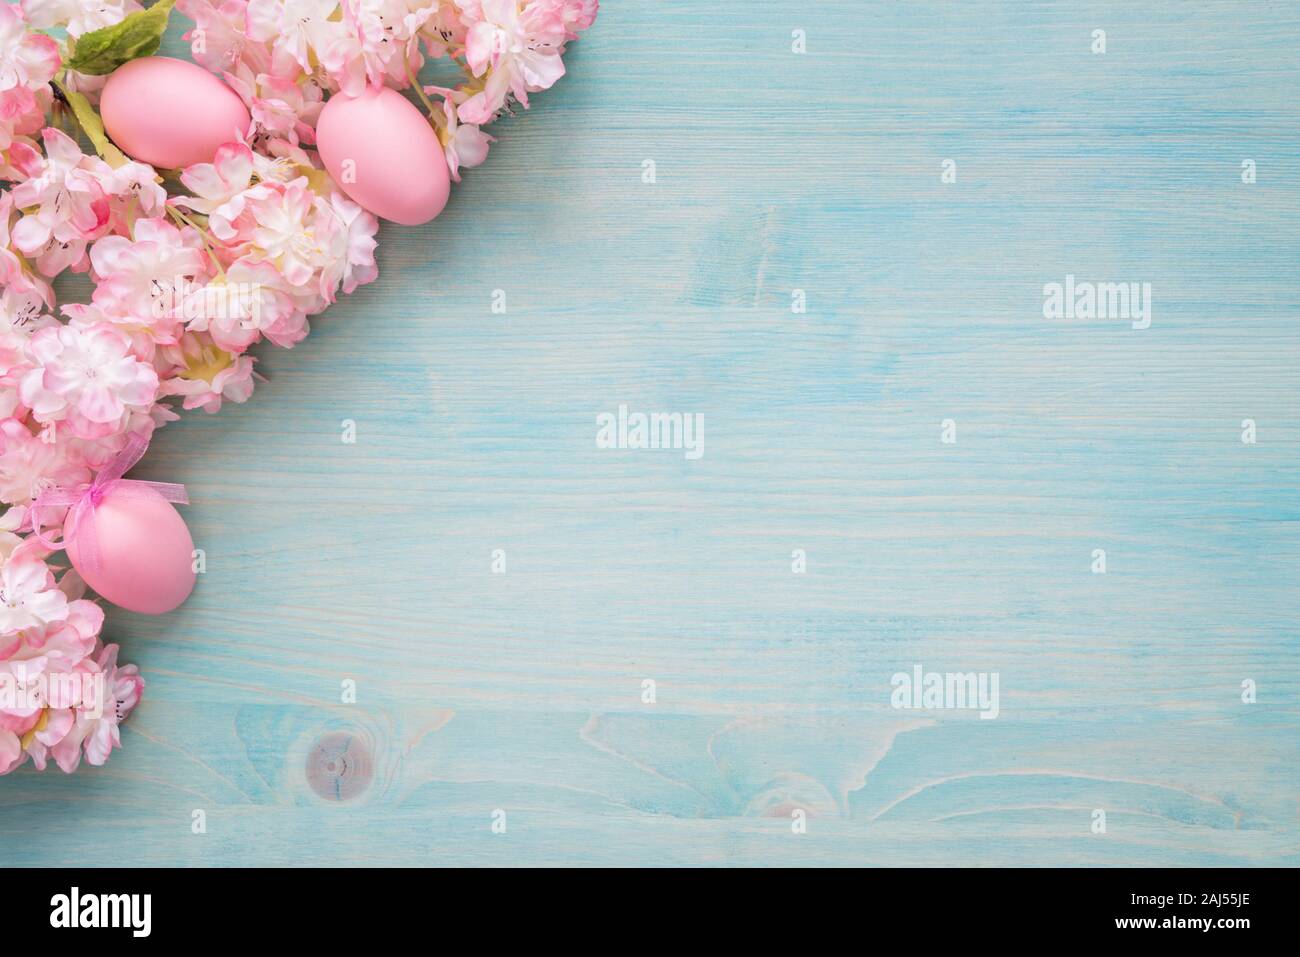 Spring Easter background of painted blue board with branch of flowering cherry covered with pink flowers and pink eggs as a border Stock Photo